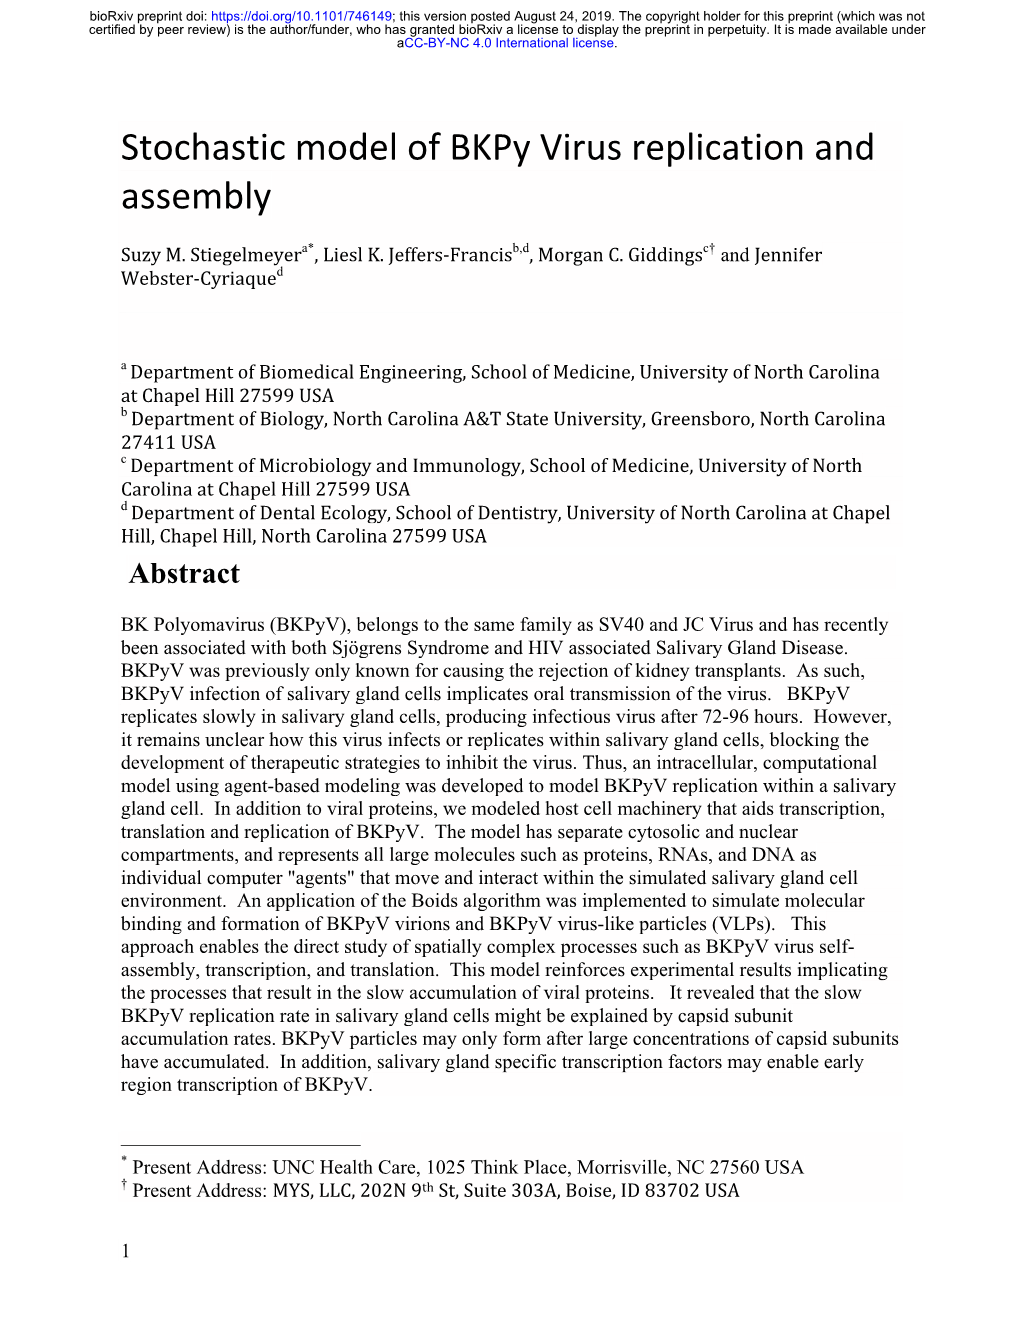 Stochastic Model of Bkpy Virus Replication and Assembly